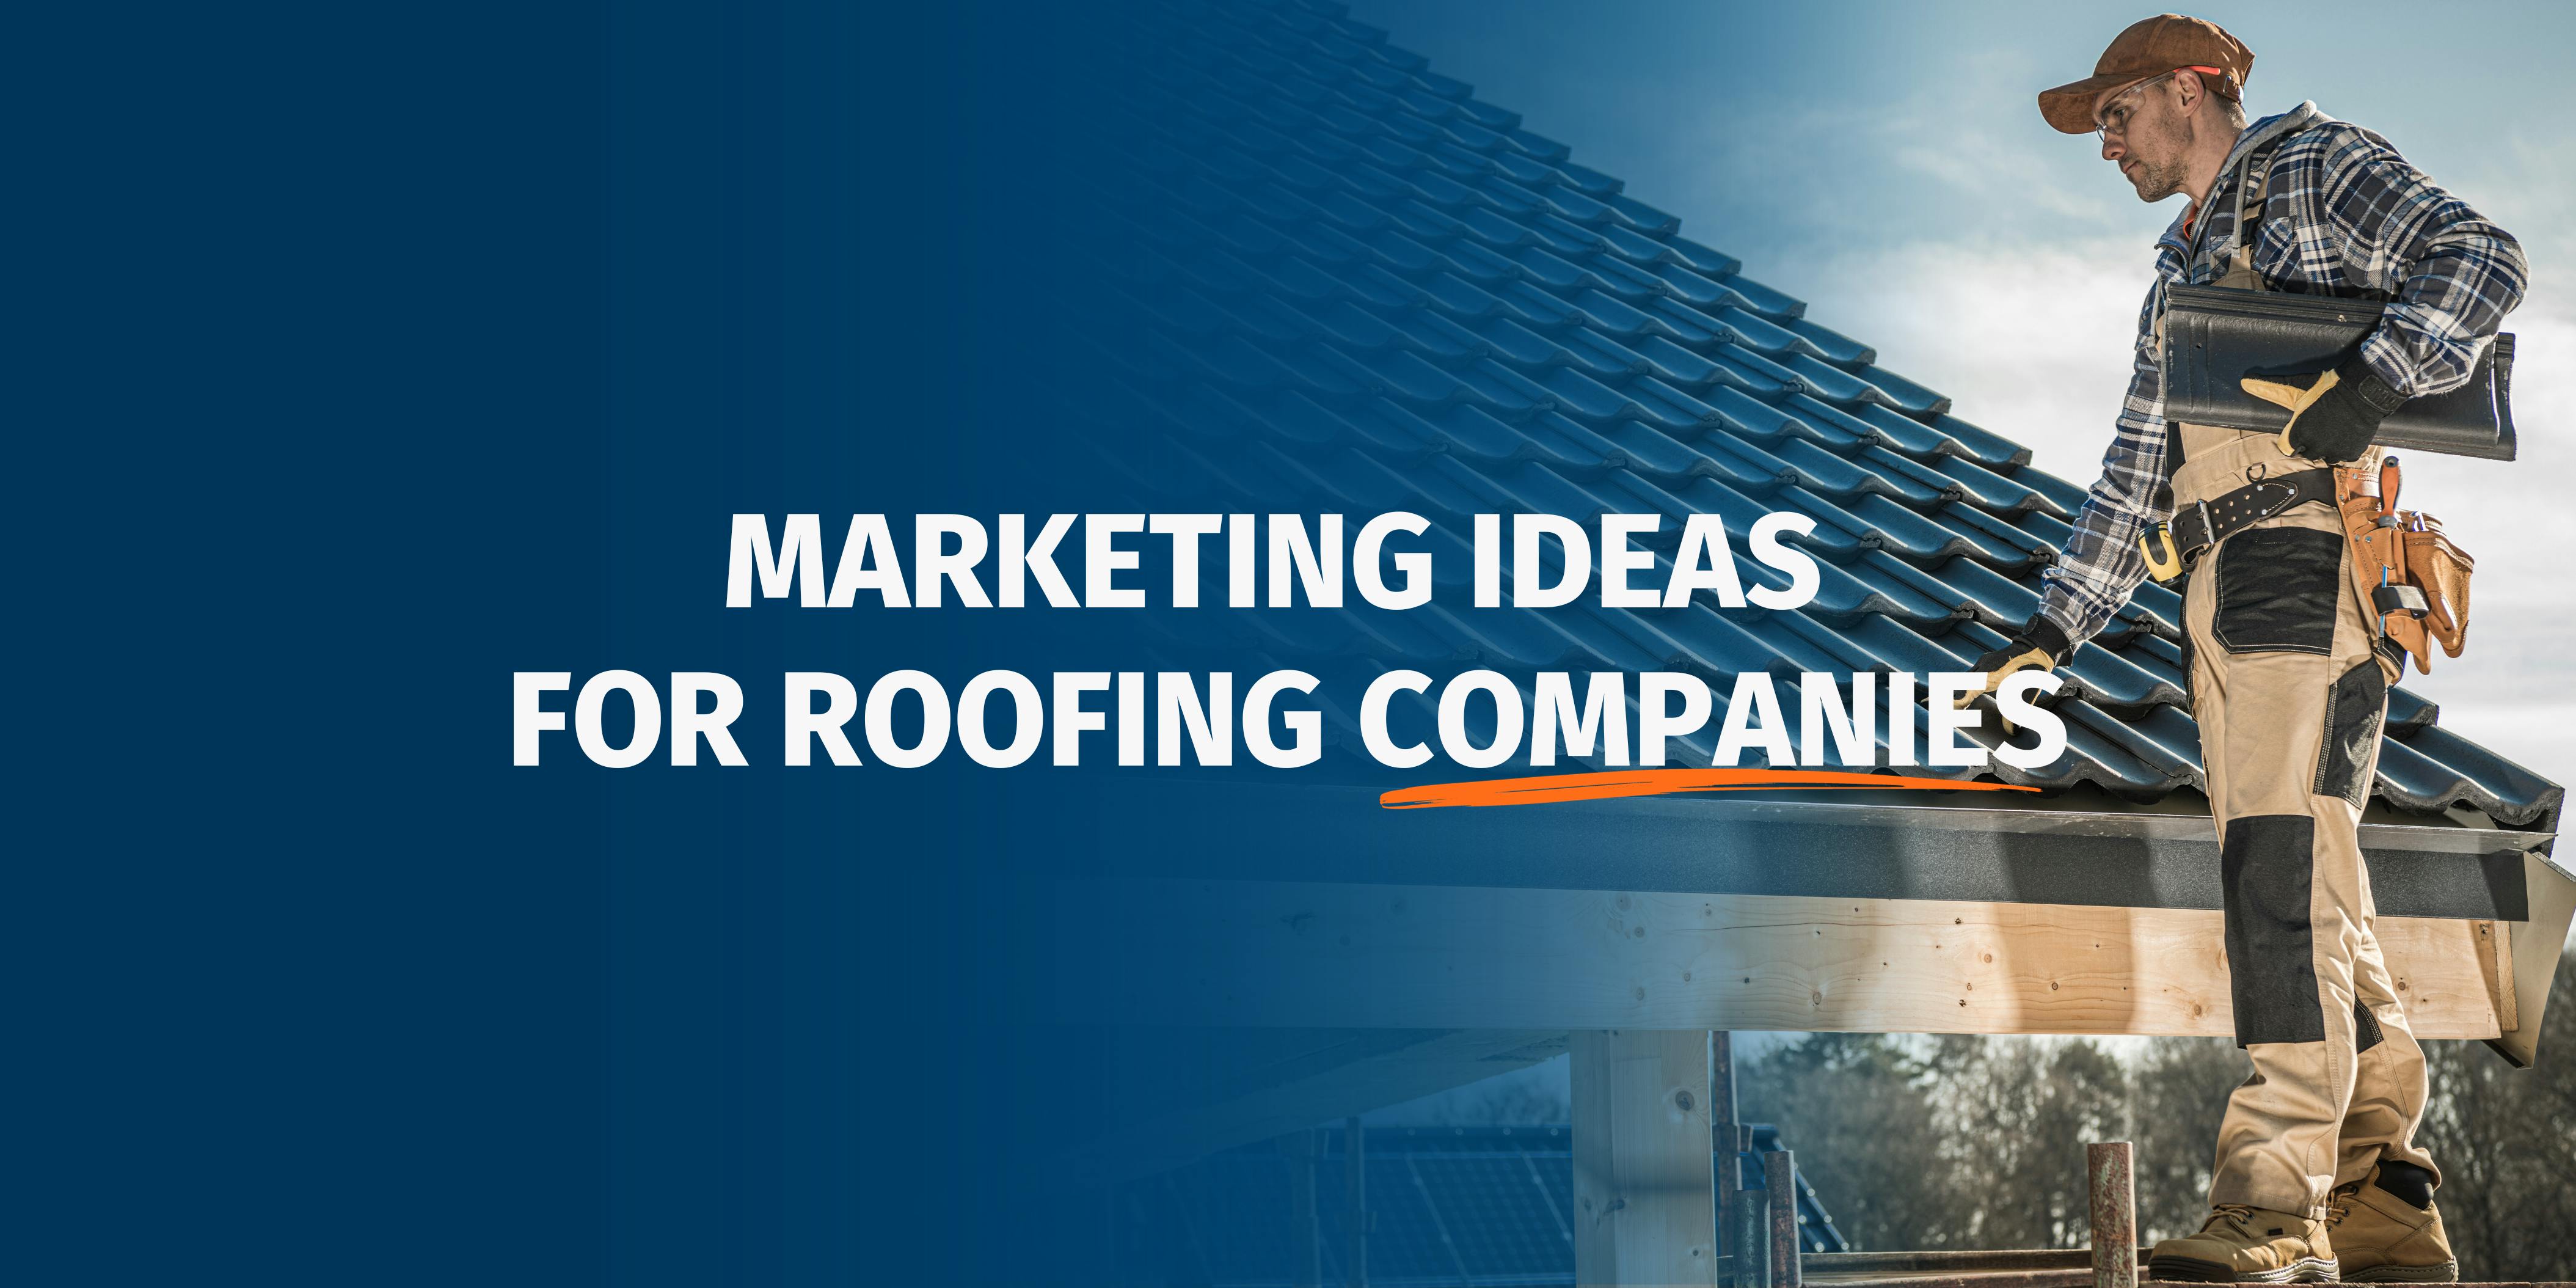 Marketing for Roofing Companies